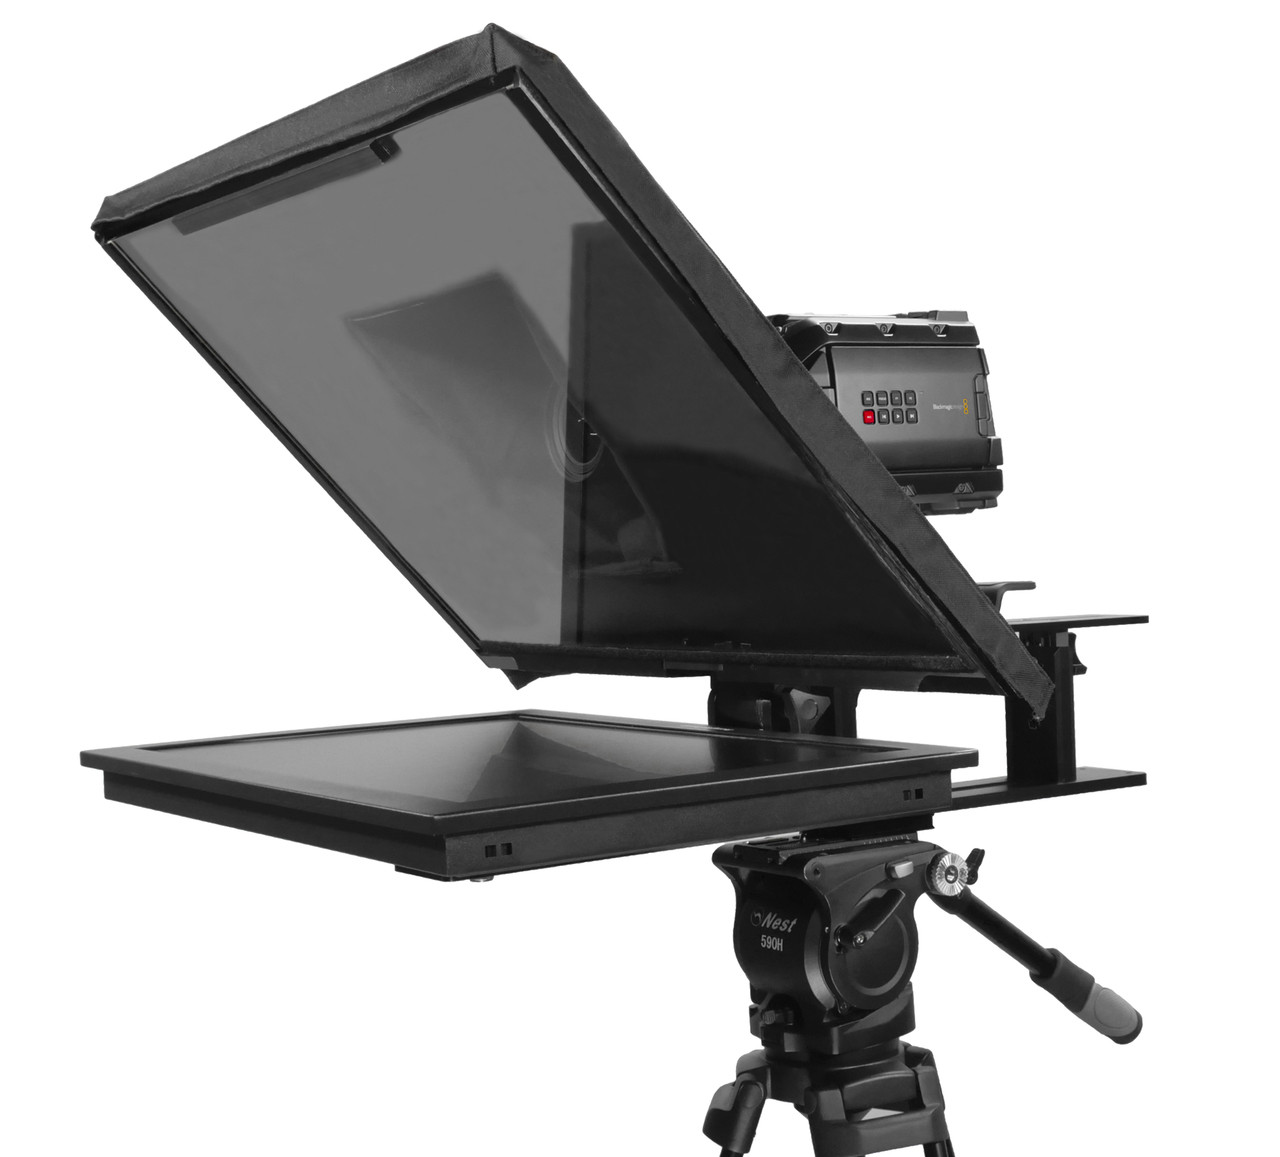 Q-Gear Pro Large Camera Teleprompter Angled